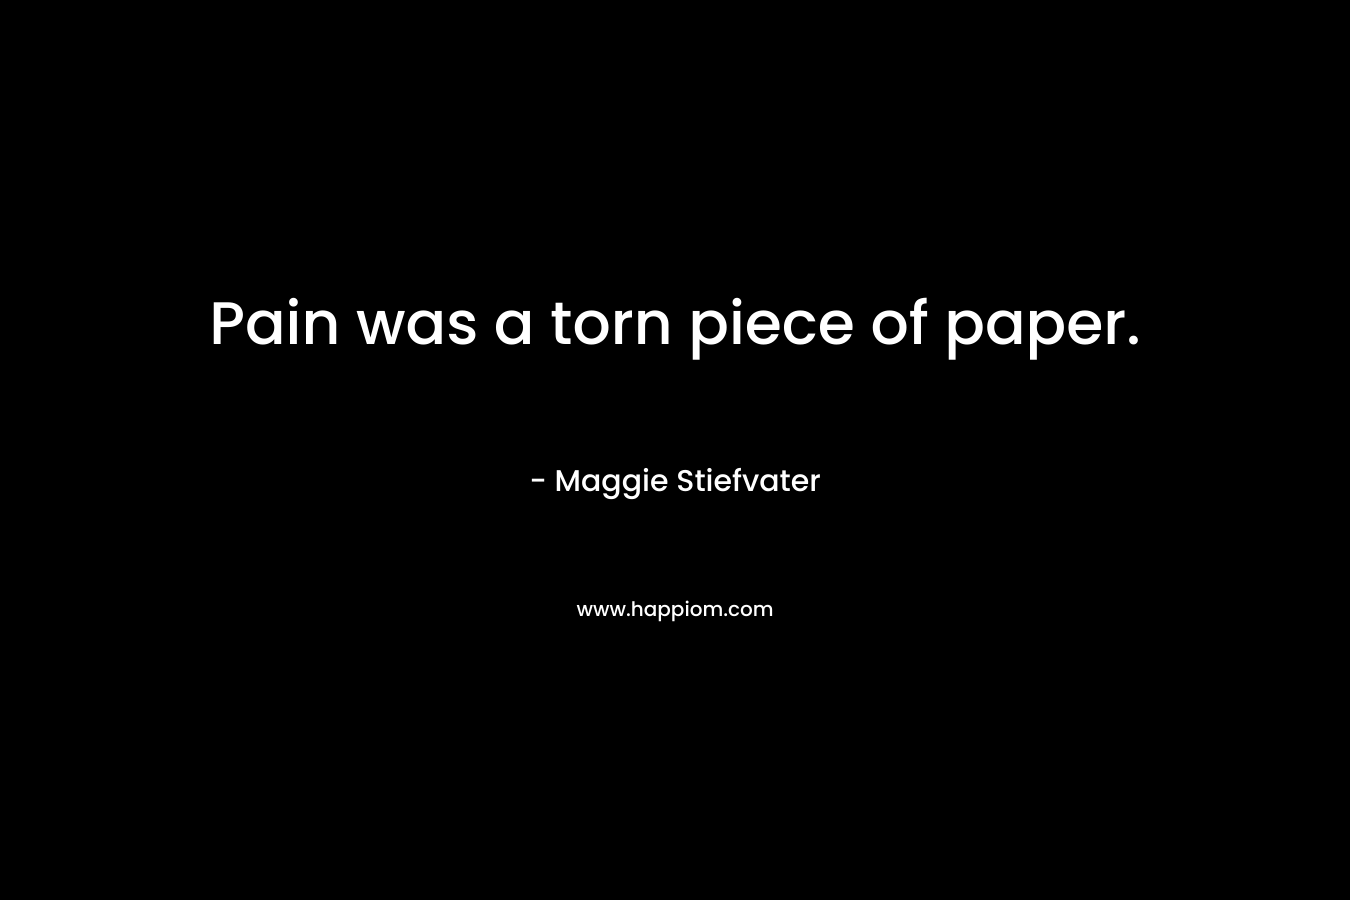 Pain was a torn piece of paper.